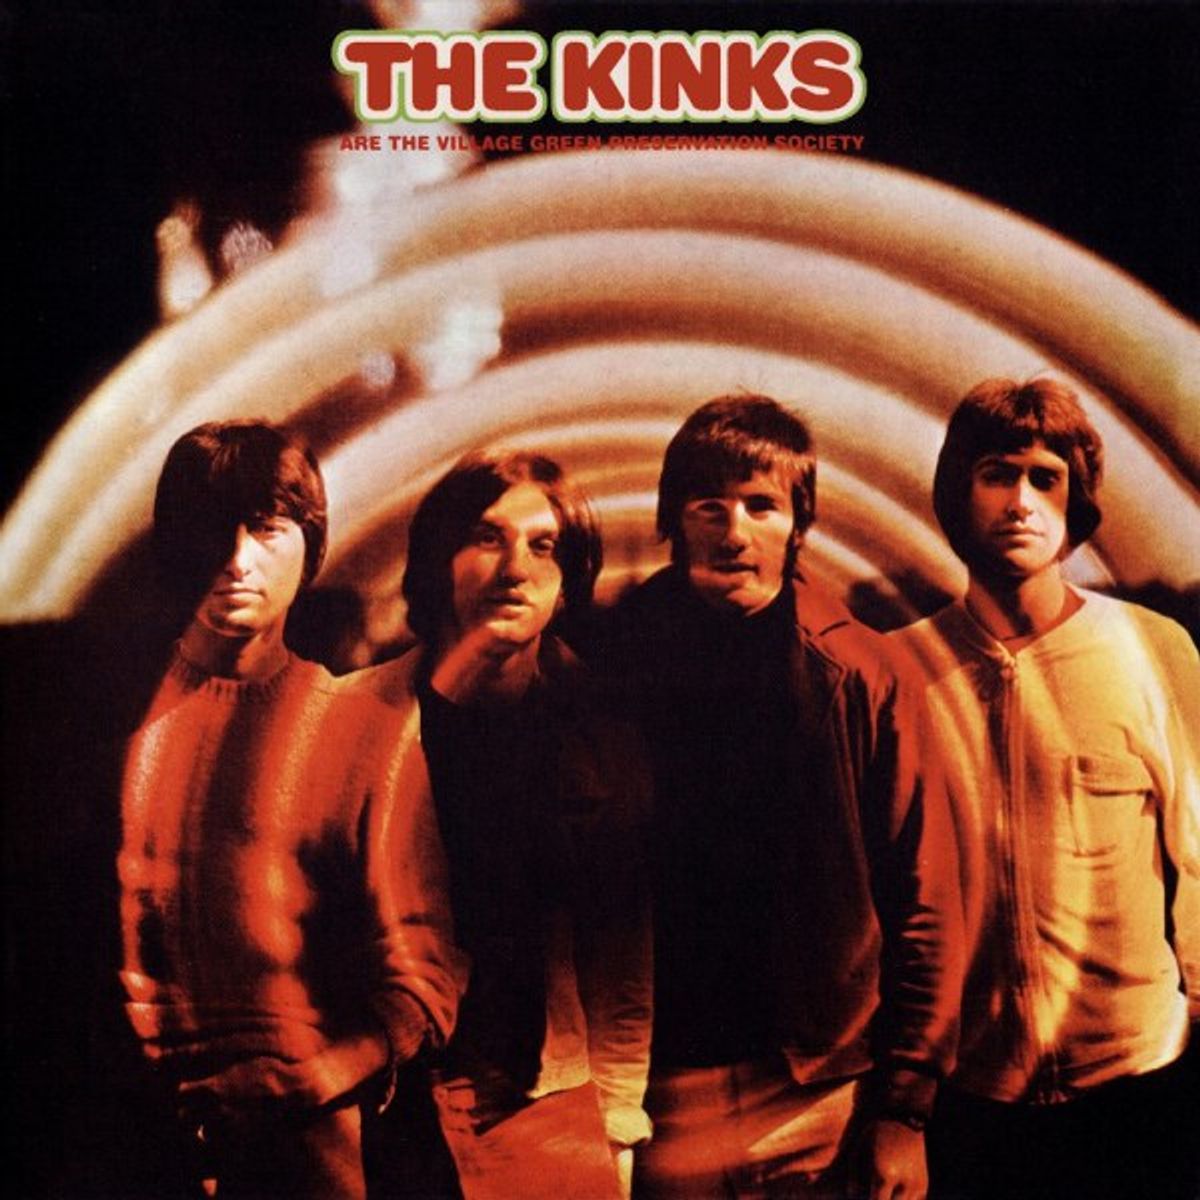 The Contemplative Humdrum of The Kinks' 'The Kinks Are the Village Green Preservation Society'